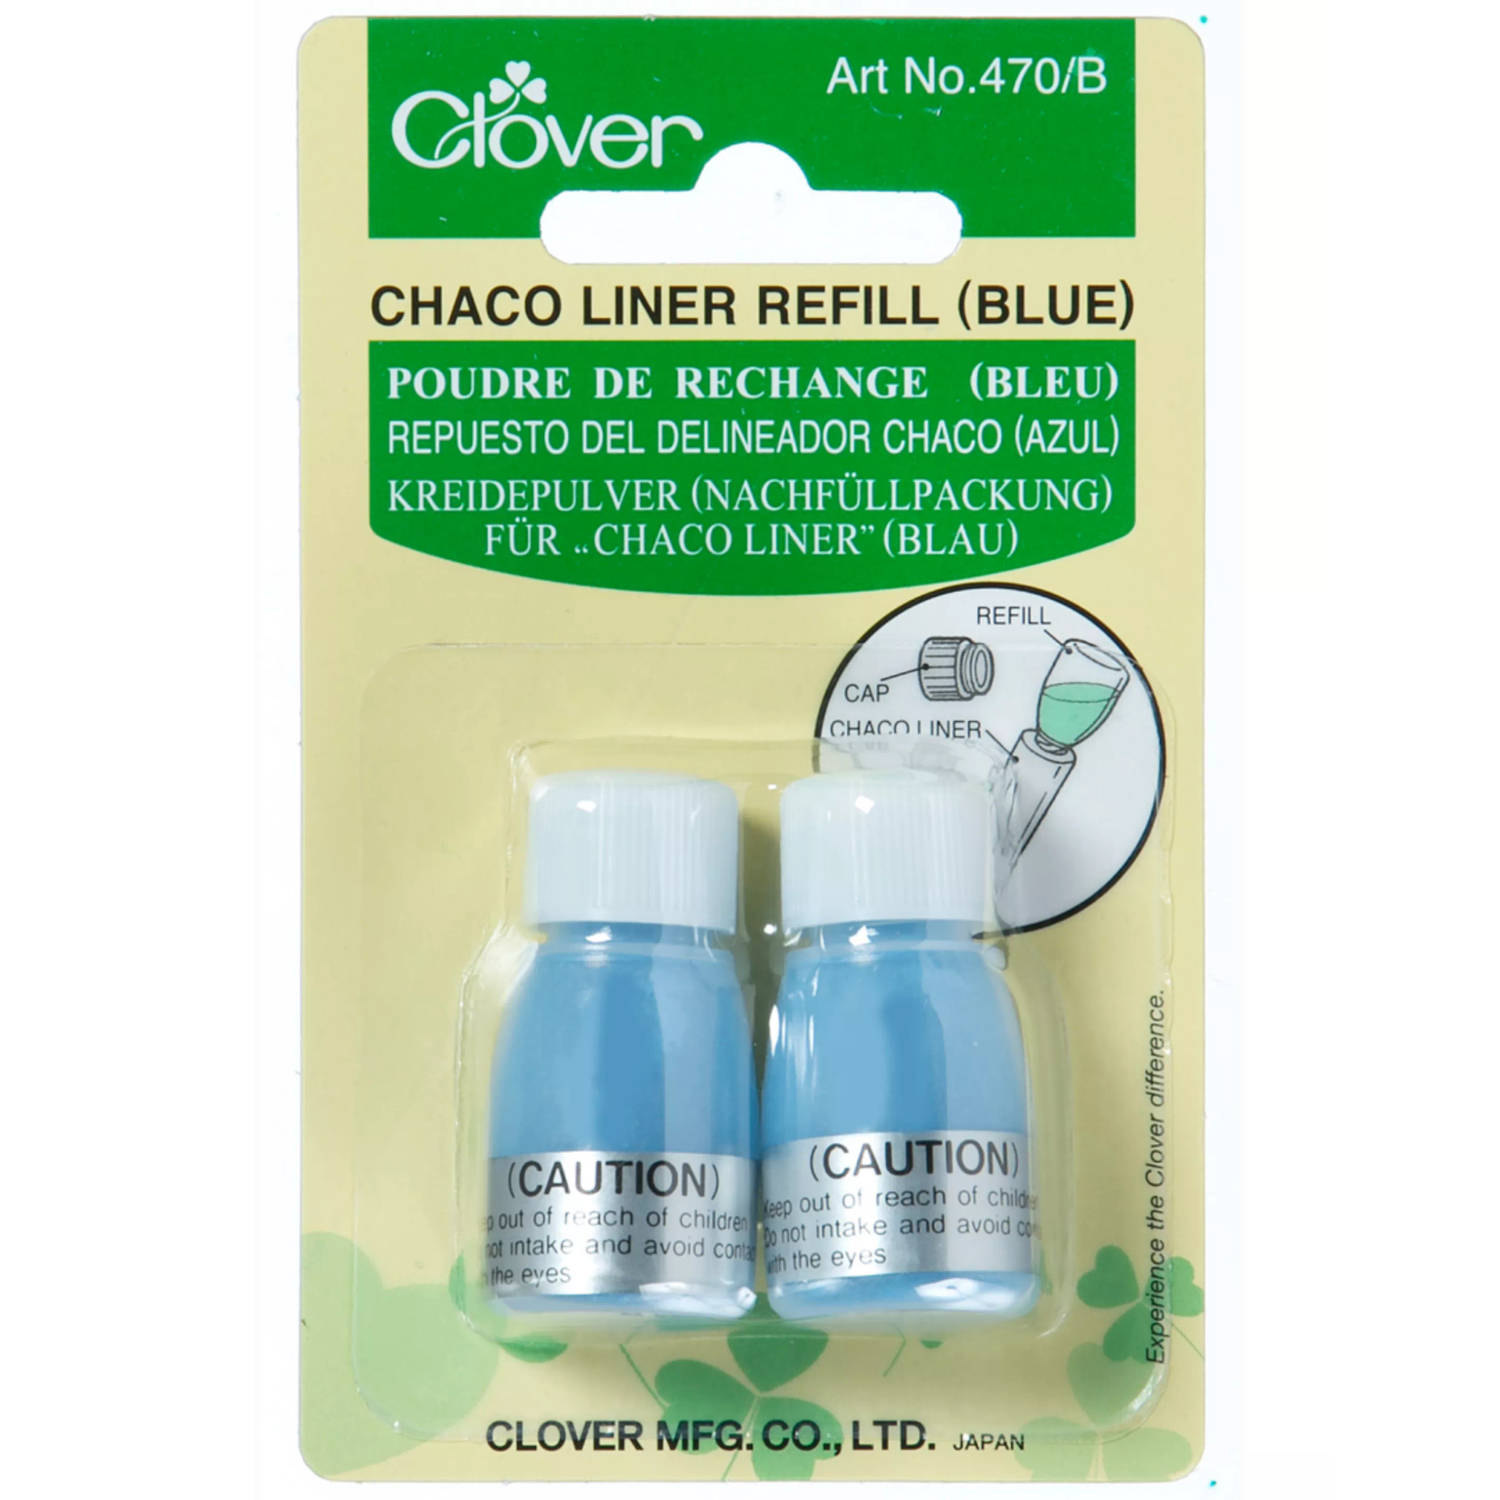 Chaco Liner Refill